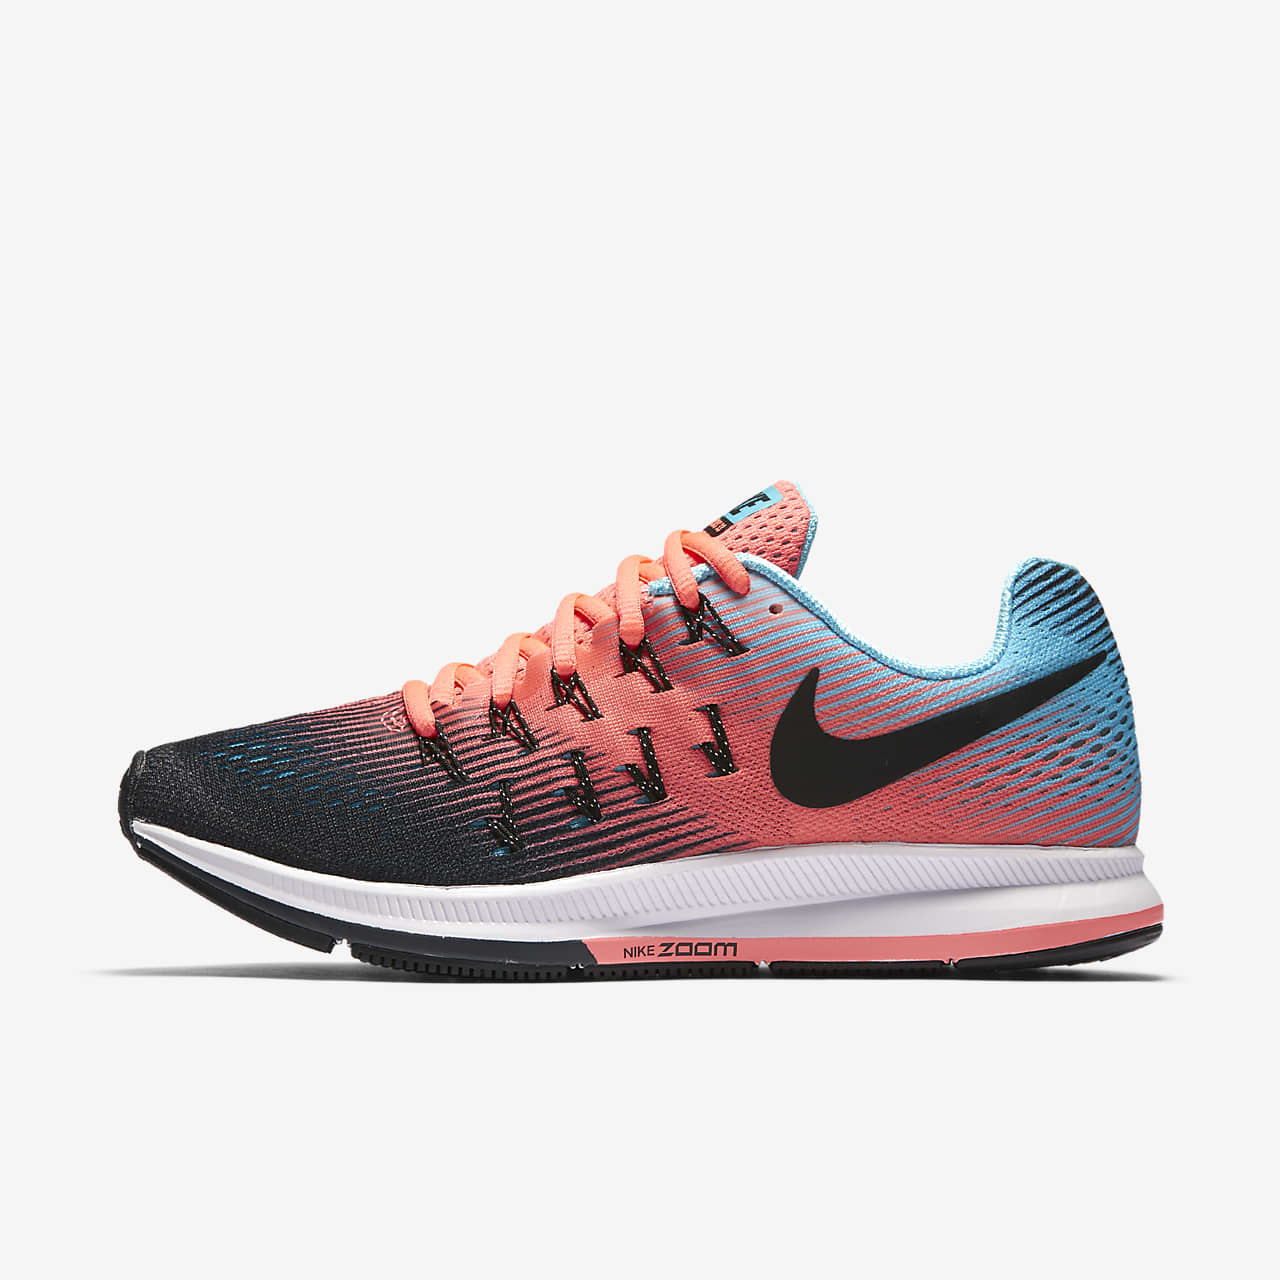 nike air zoom 33 shoes price online -